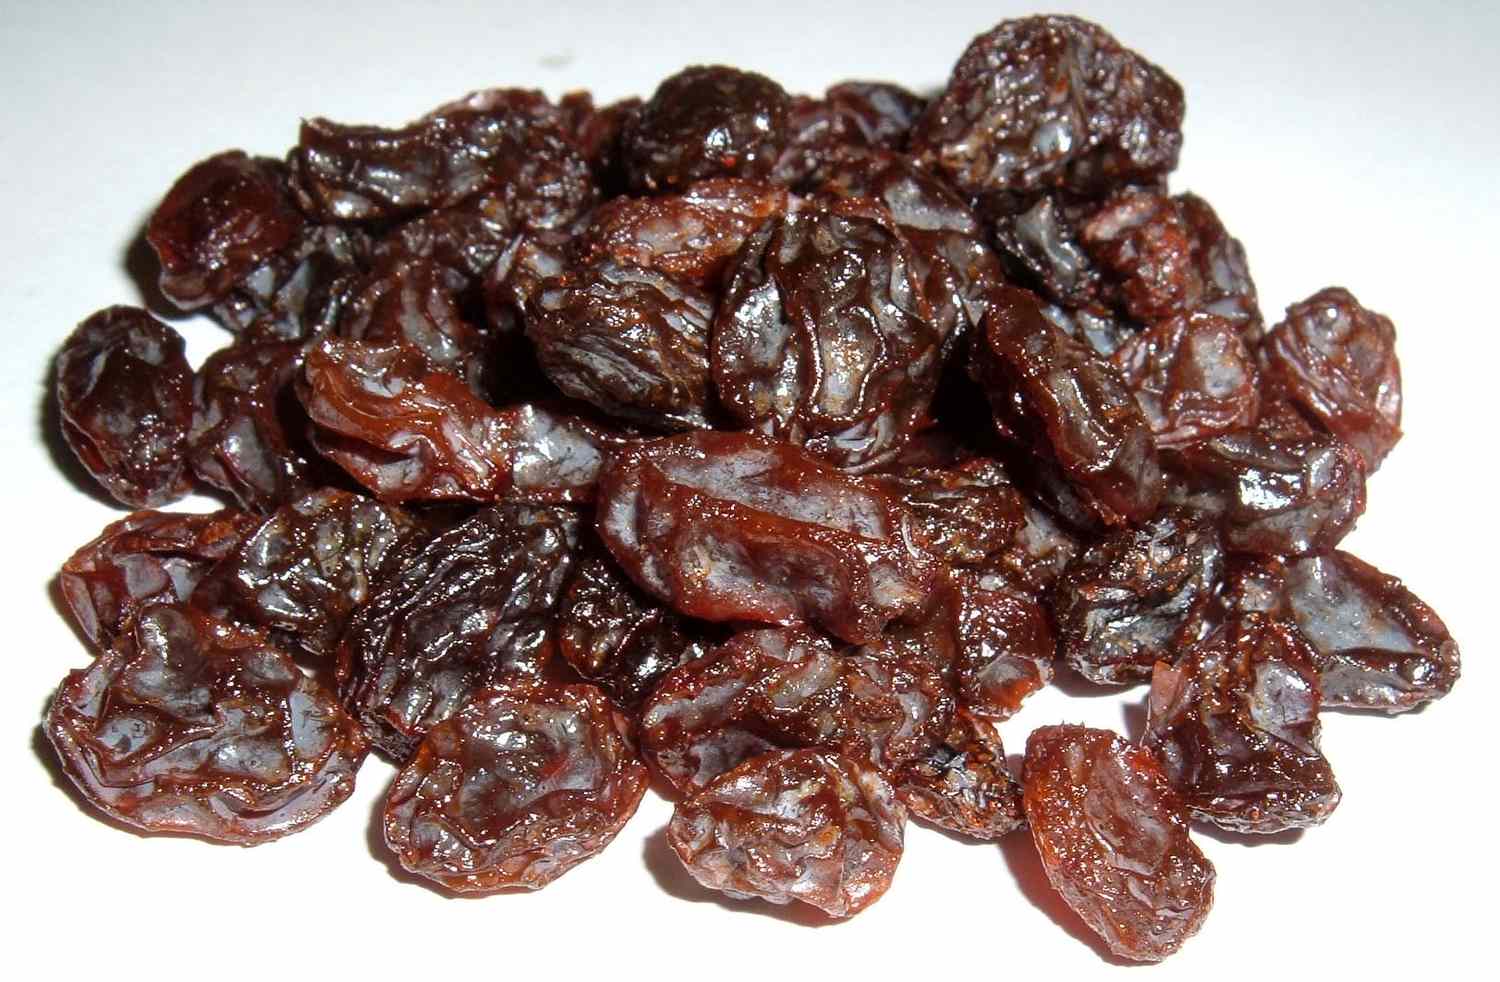 In summary, while raisins, sultanas, and currants may all come from grapes and appear similar, their differences lie in the type of grape used, color, taste, and texture. So, whether you're craving a chewy and slightly tangy addition to your oatmeal, a soft and sweet ingredient for your cake, or a tart burst of flavor in your baked goods, knowing the difference between these dried fruits can help you choose the perfect one for your recipe.